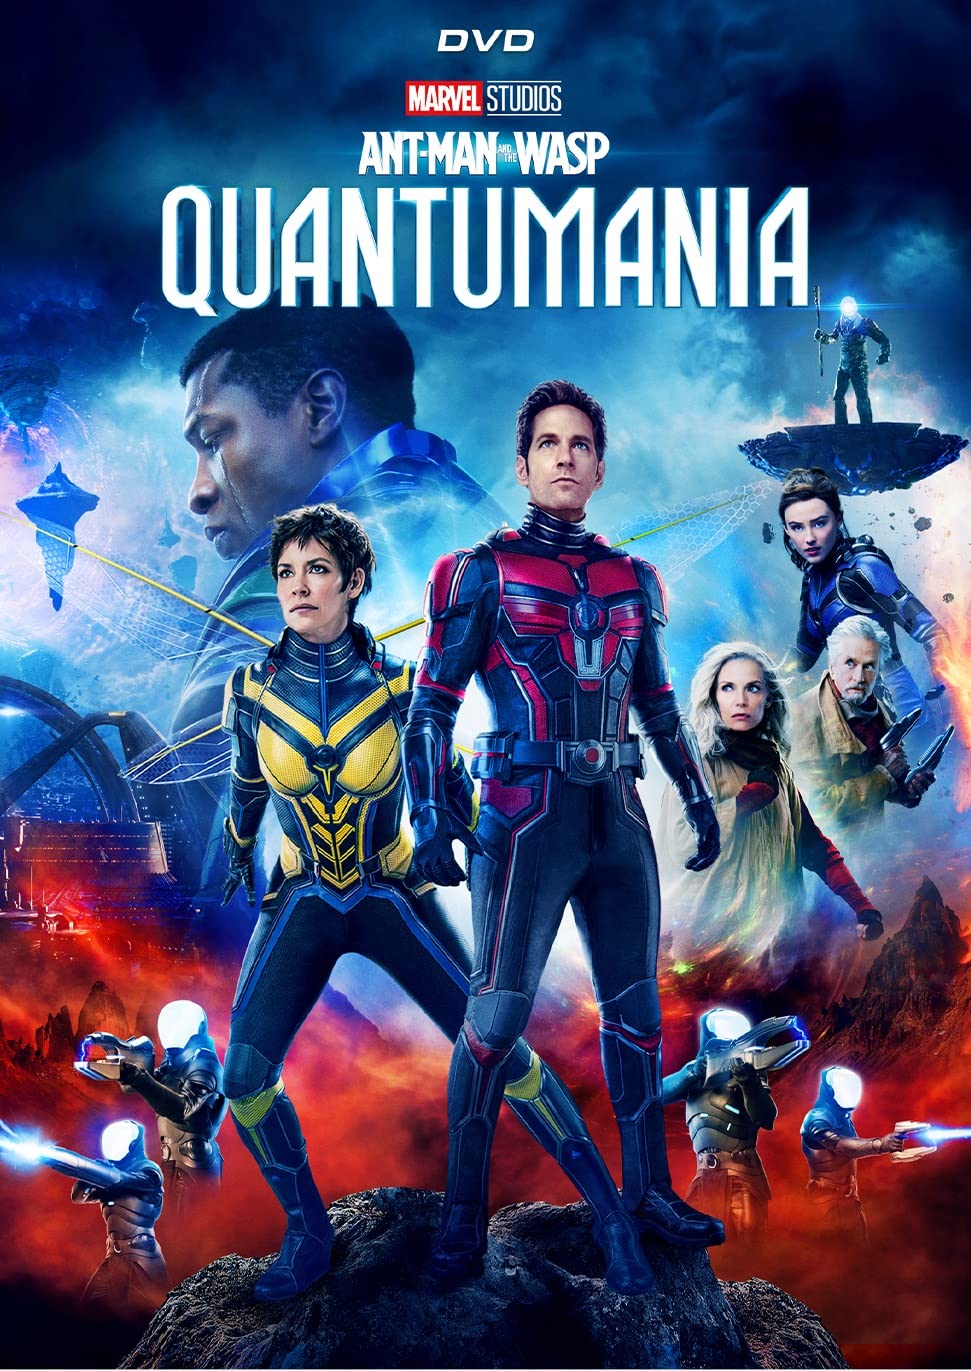 Image for "Ant-Man and the Wasp. Quantumania"